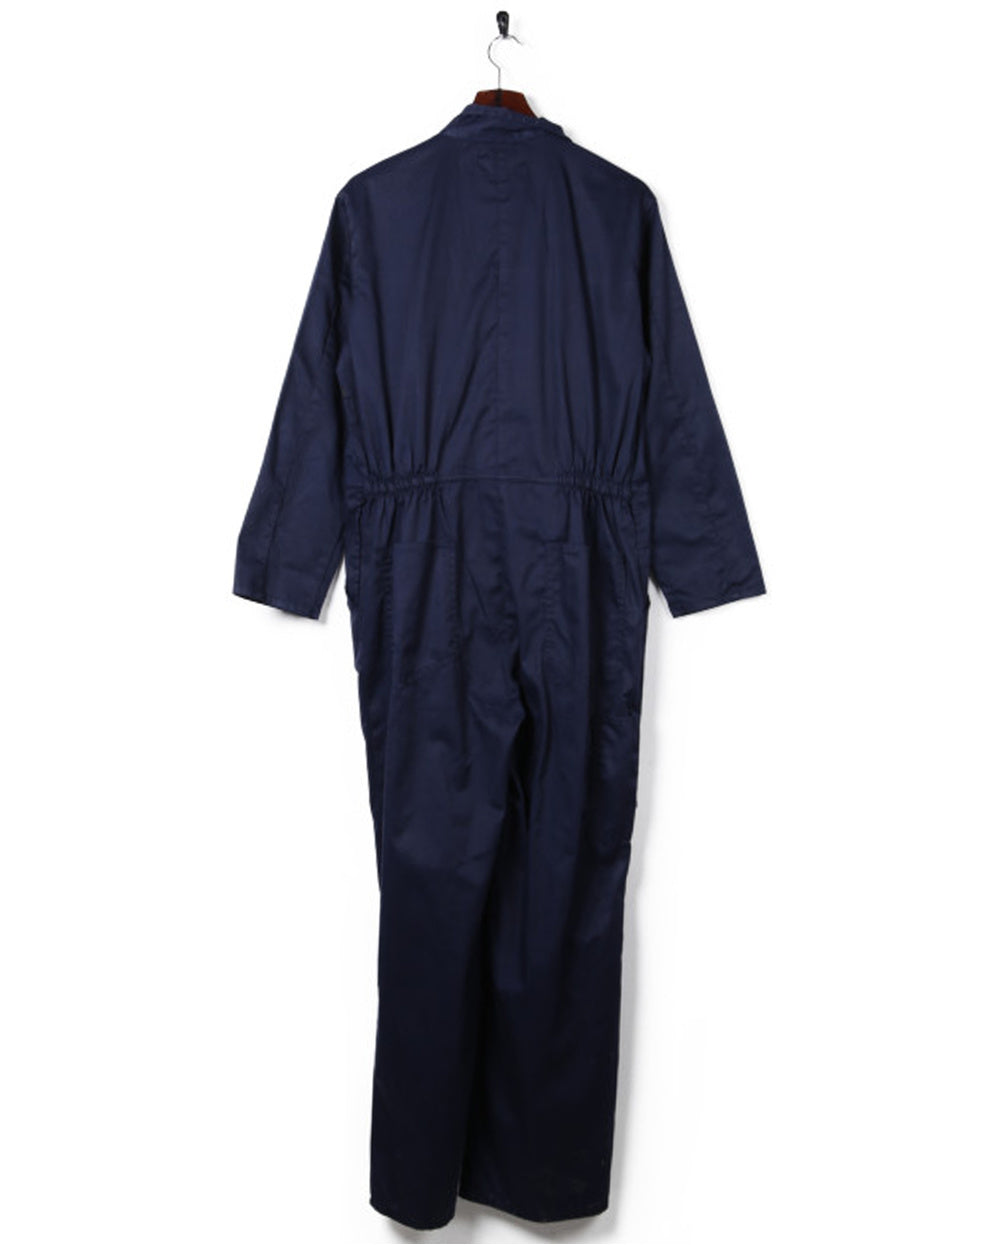 70s 80s Maw Holland Navy Blue Overalls - L